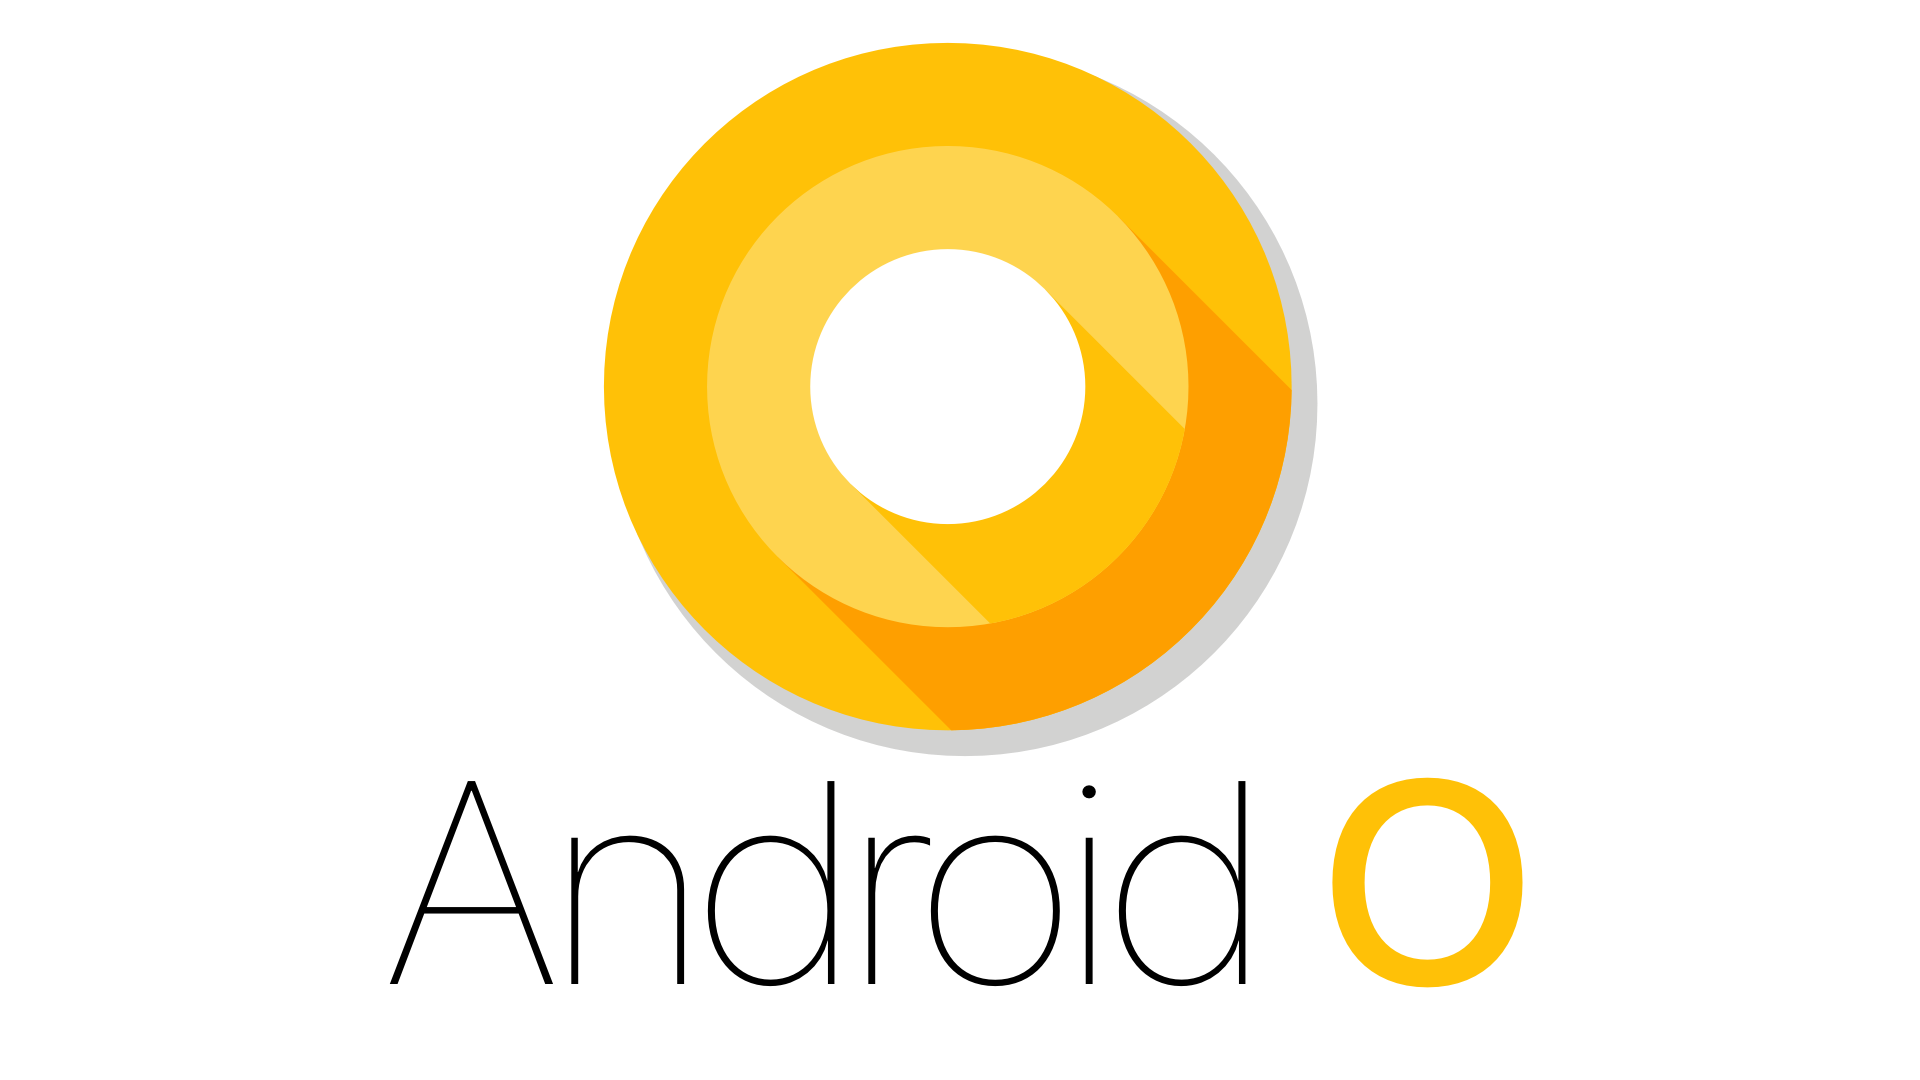 Here Comes the Android O : Everything About Upcoming Android OS. - Wildnet